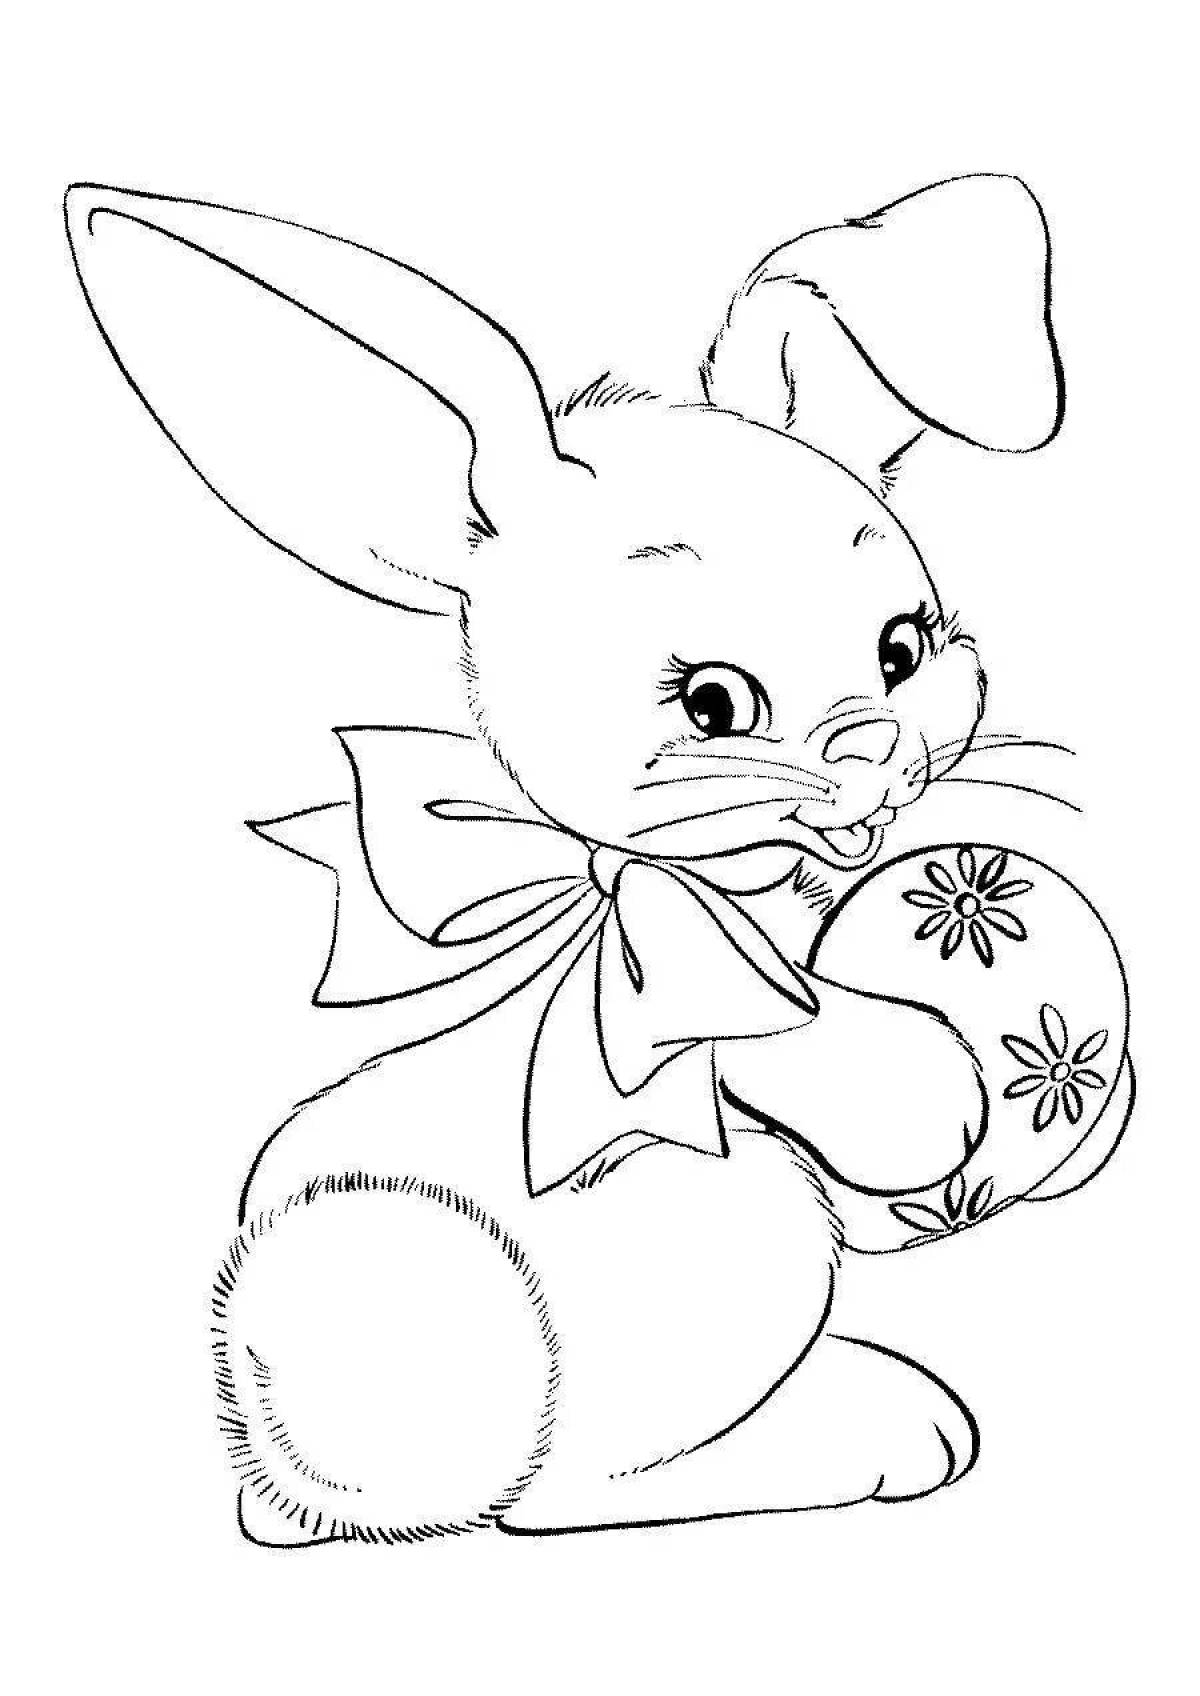 Glowing hare christmas coloring book